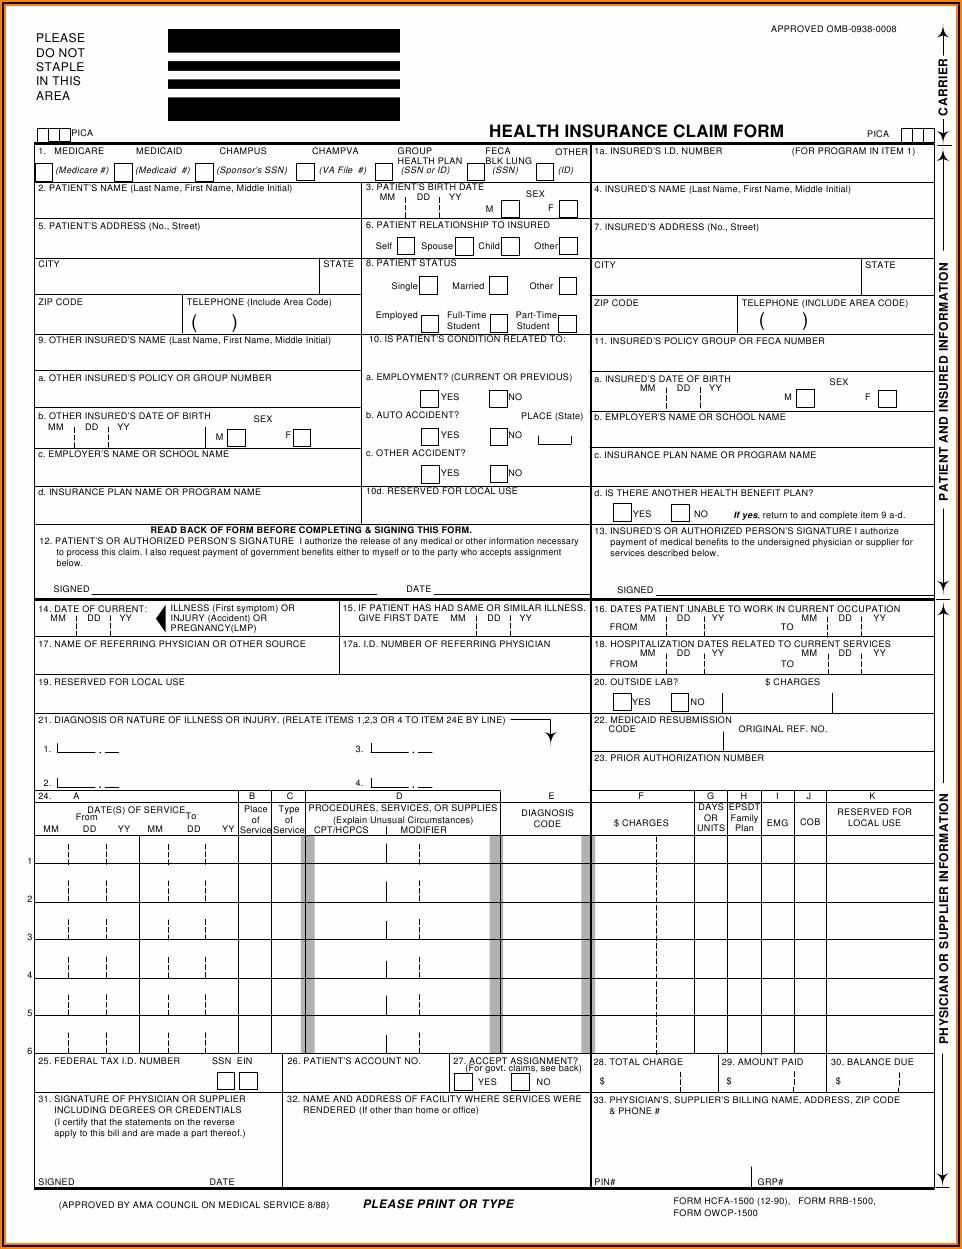 Health Insurance Claim Form 1500 Download